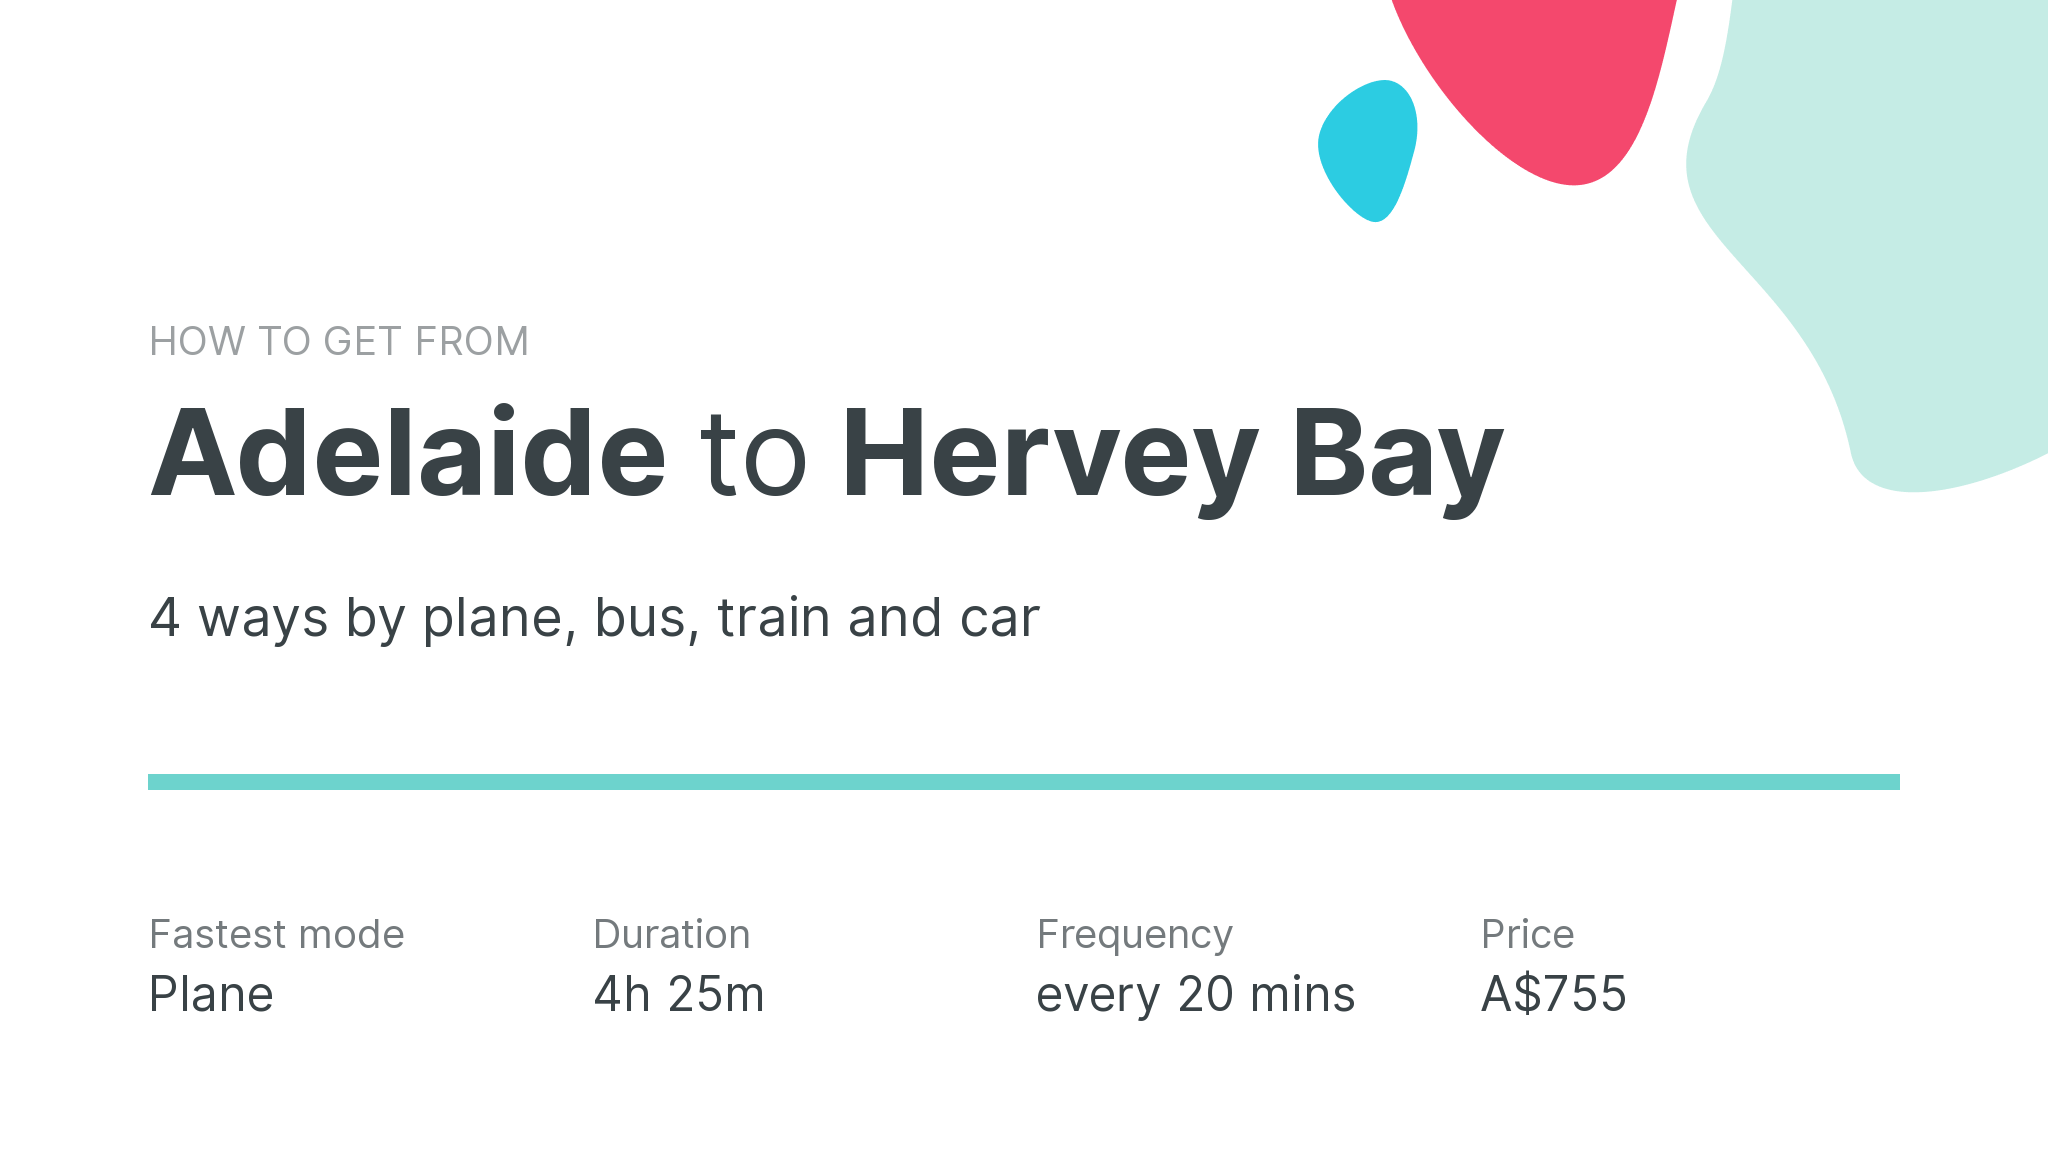 How do I get from Adelaide to Hervey Bay